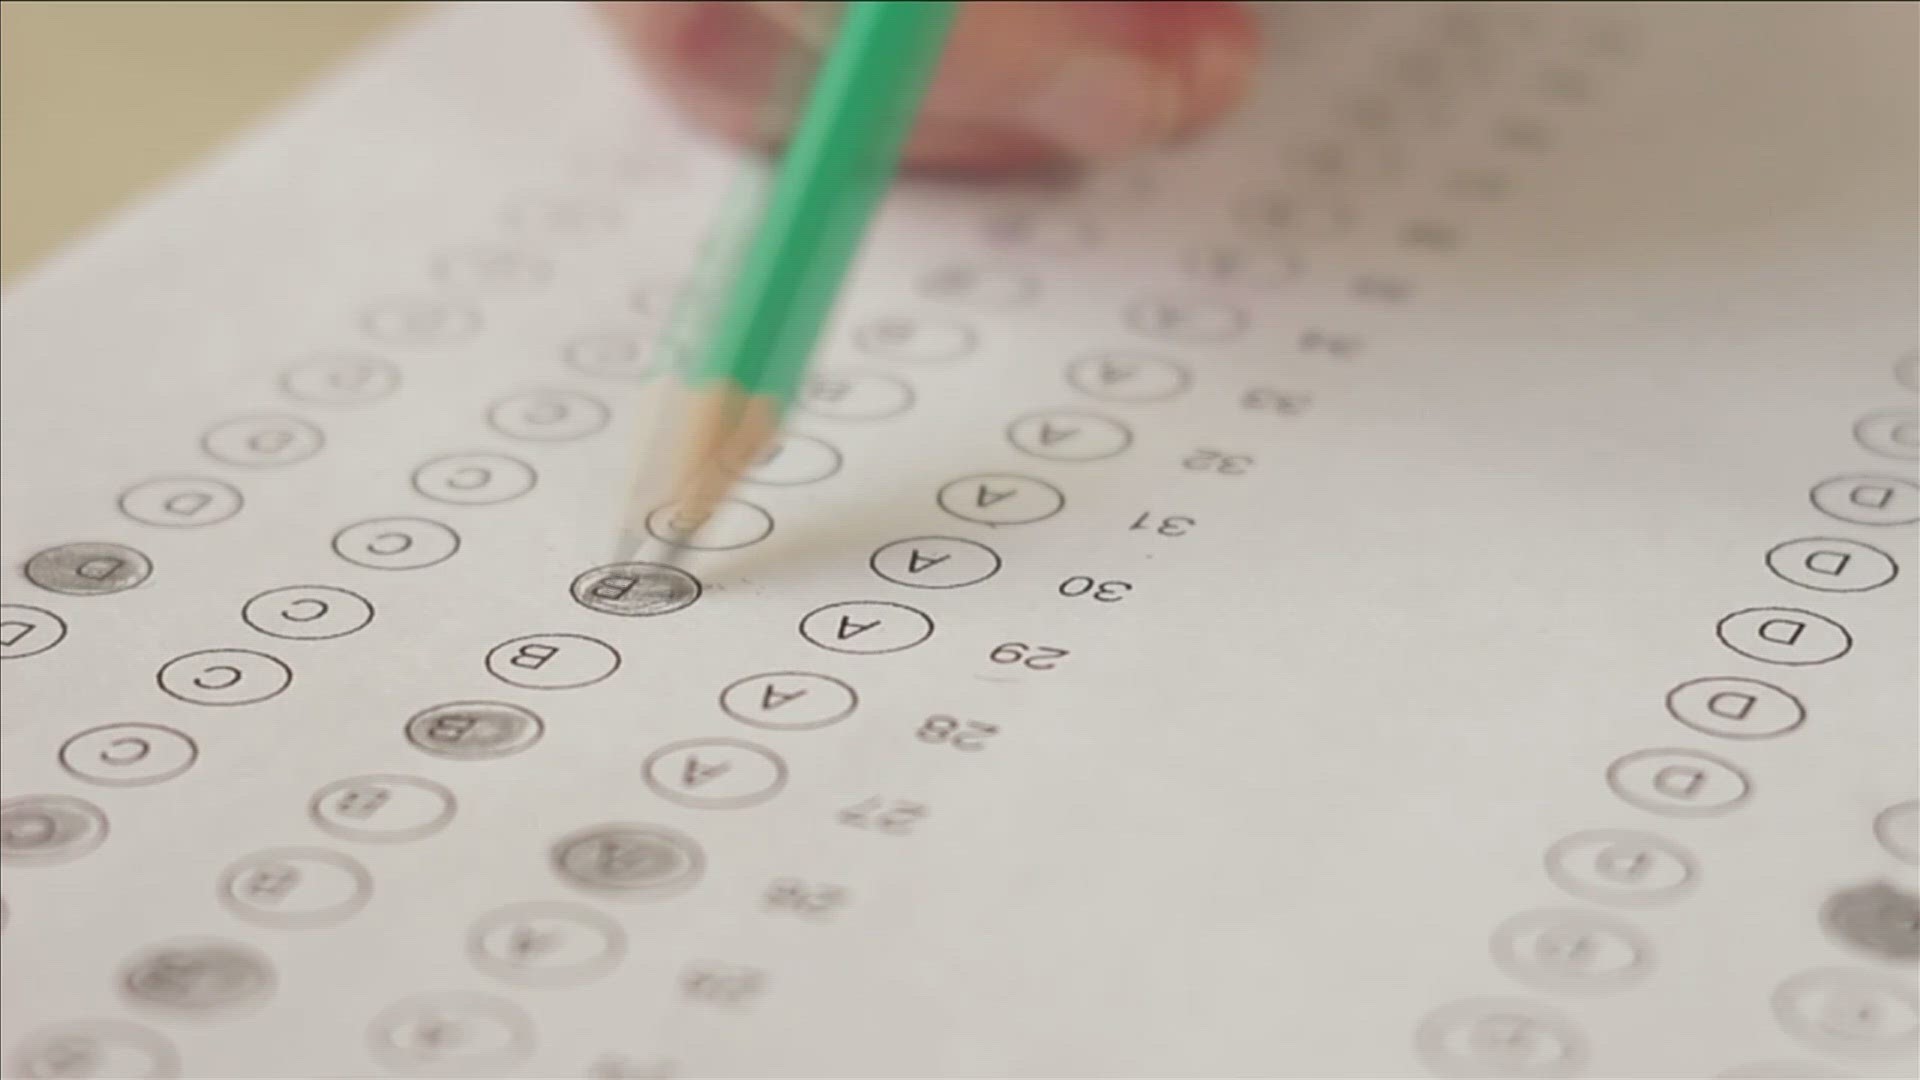 More than half of the third graders across the state failed to pass their TCAP exam the first time they tested. Now parents are filing appeals.